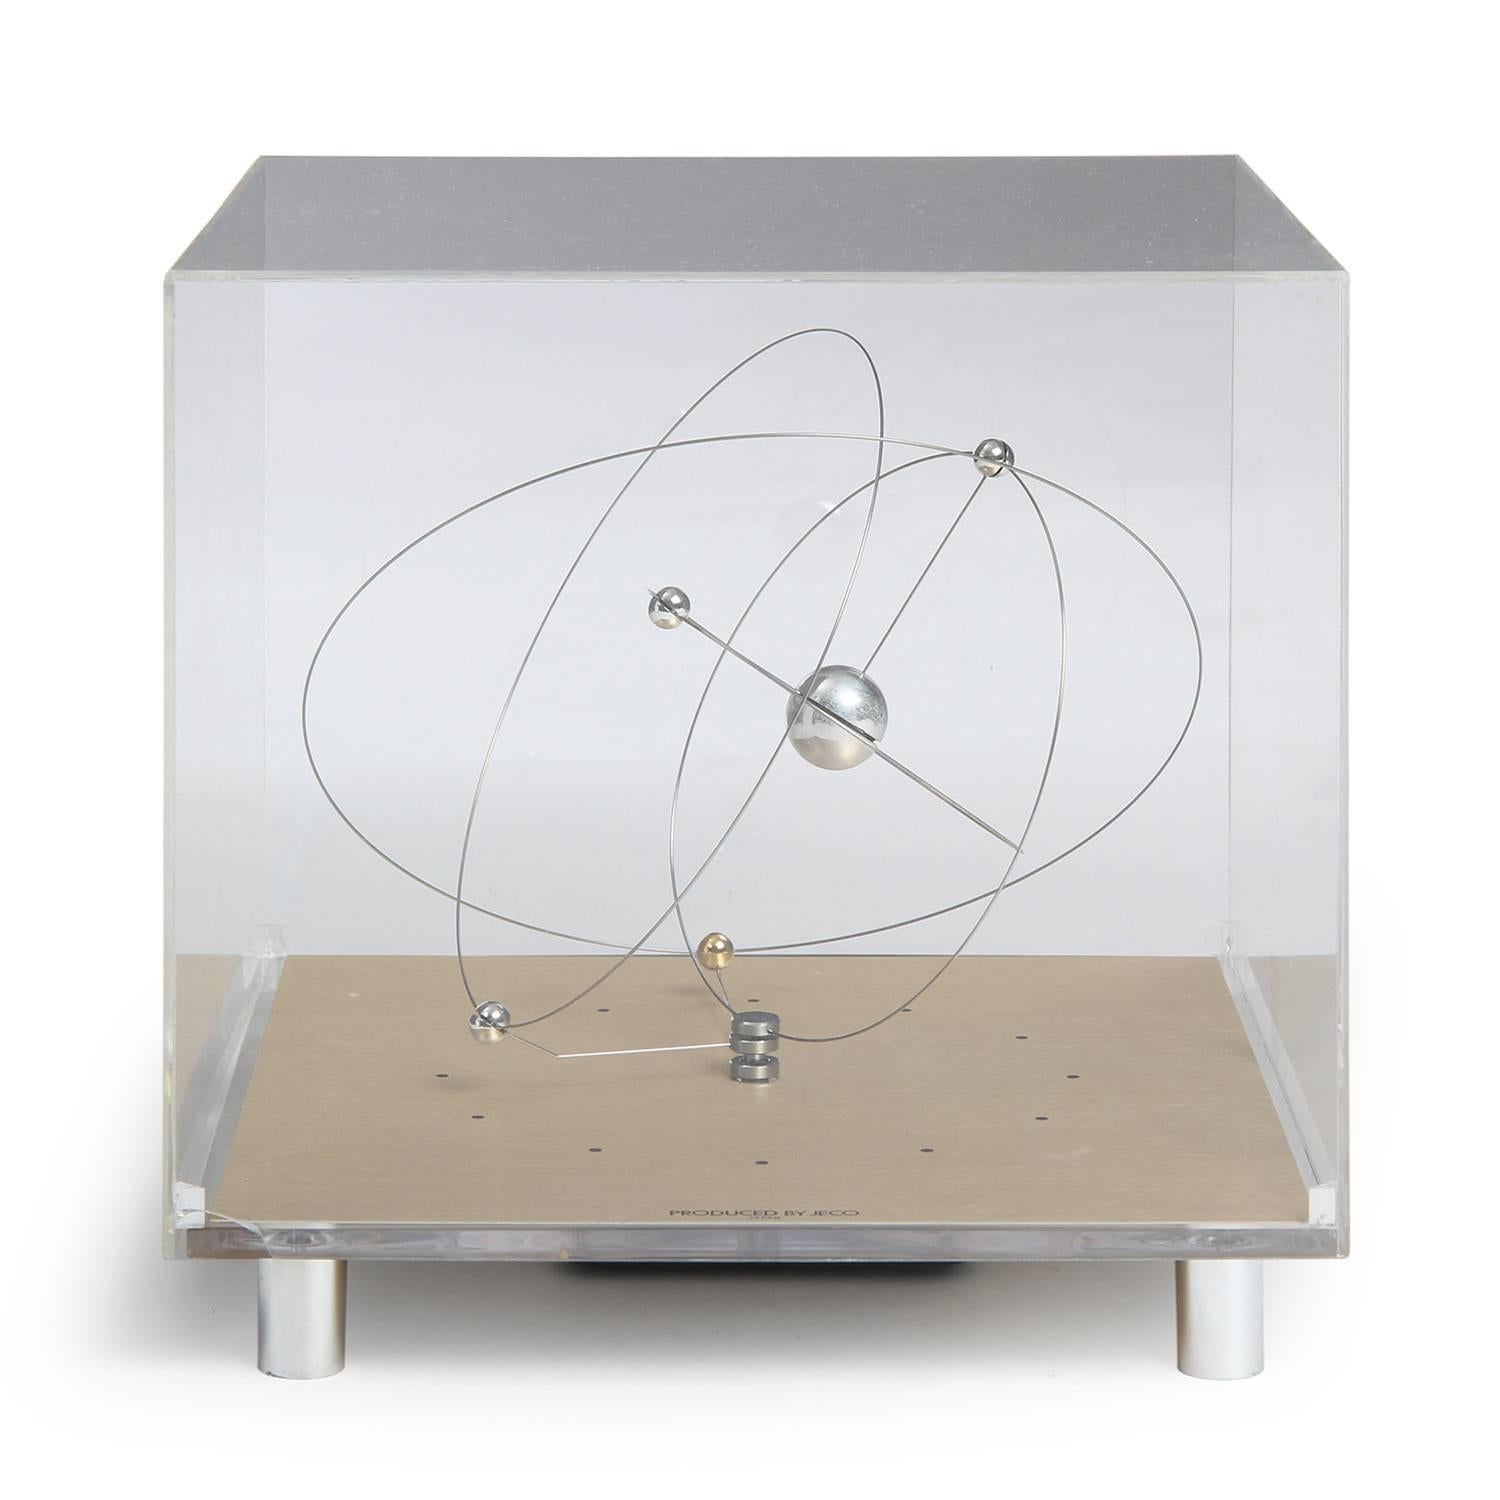 An unusual and highly innovative space age clock having rotating and orbiting stainless steel rings and orbs encased in a  lucite cube marking the passing of time.